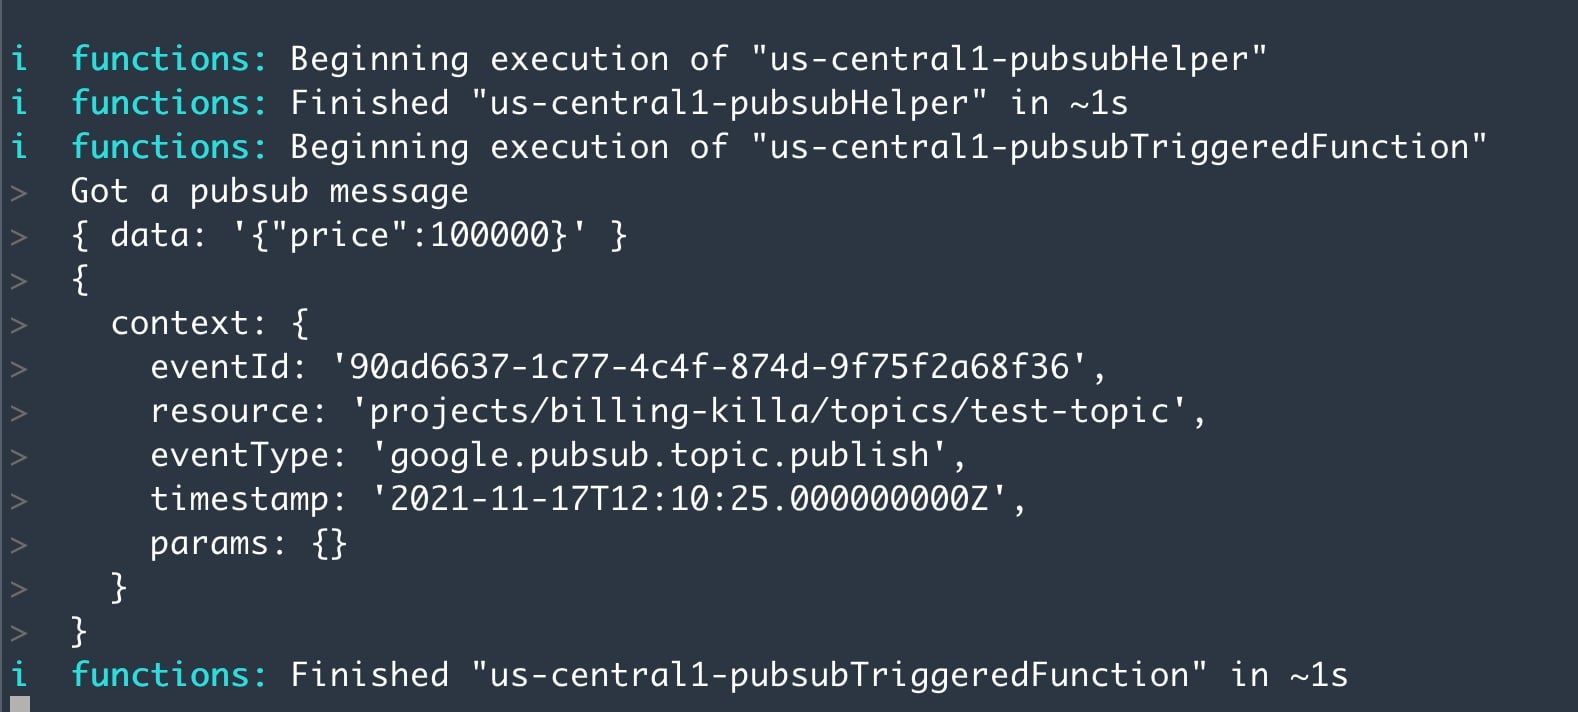 Firebase Functions Console Output